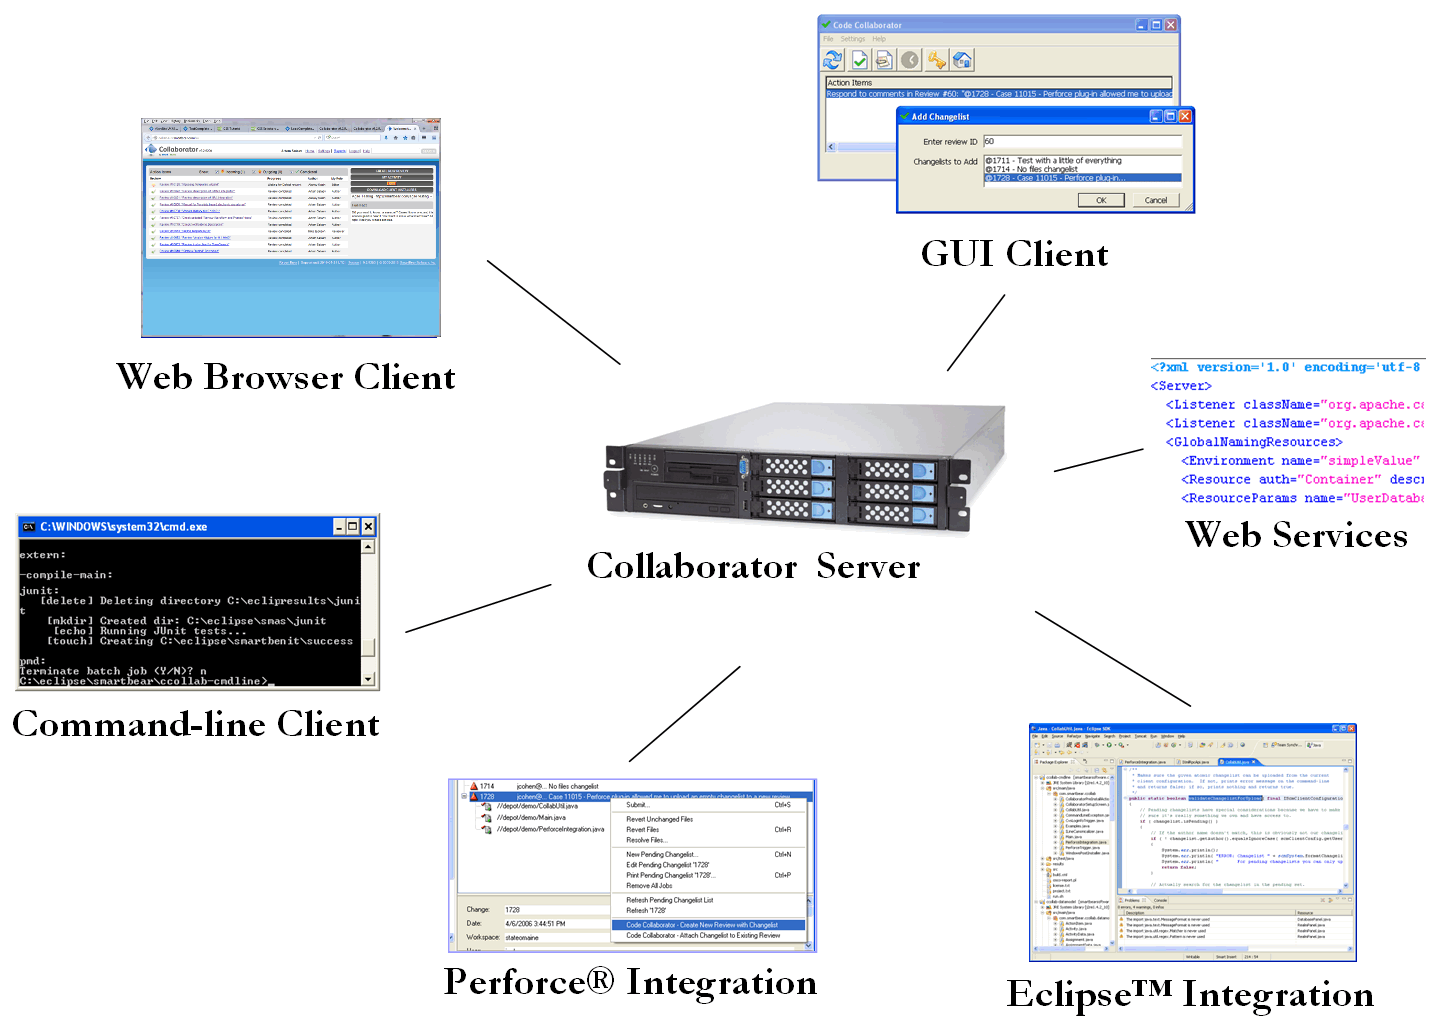 Collaborator Server and Clients